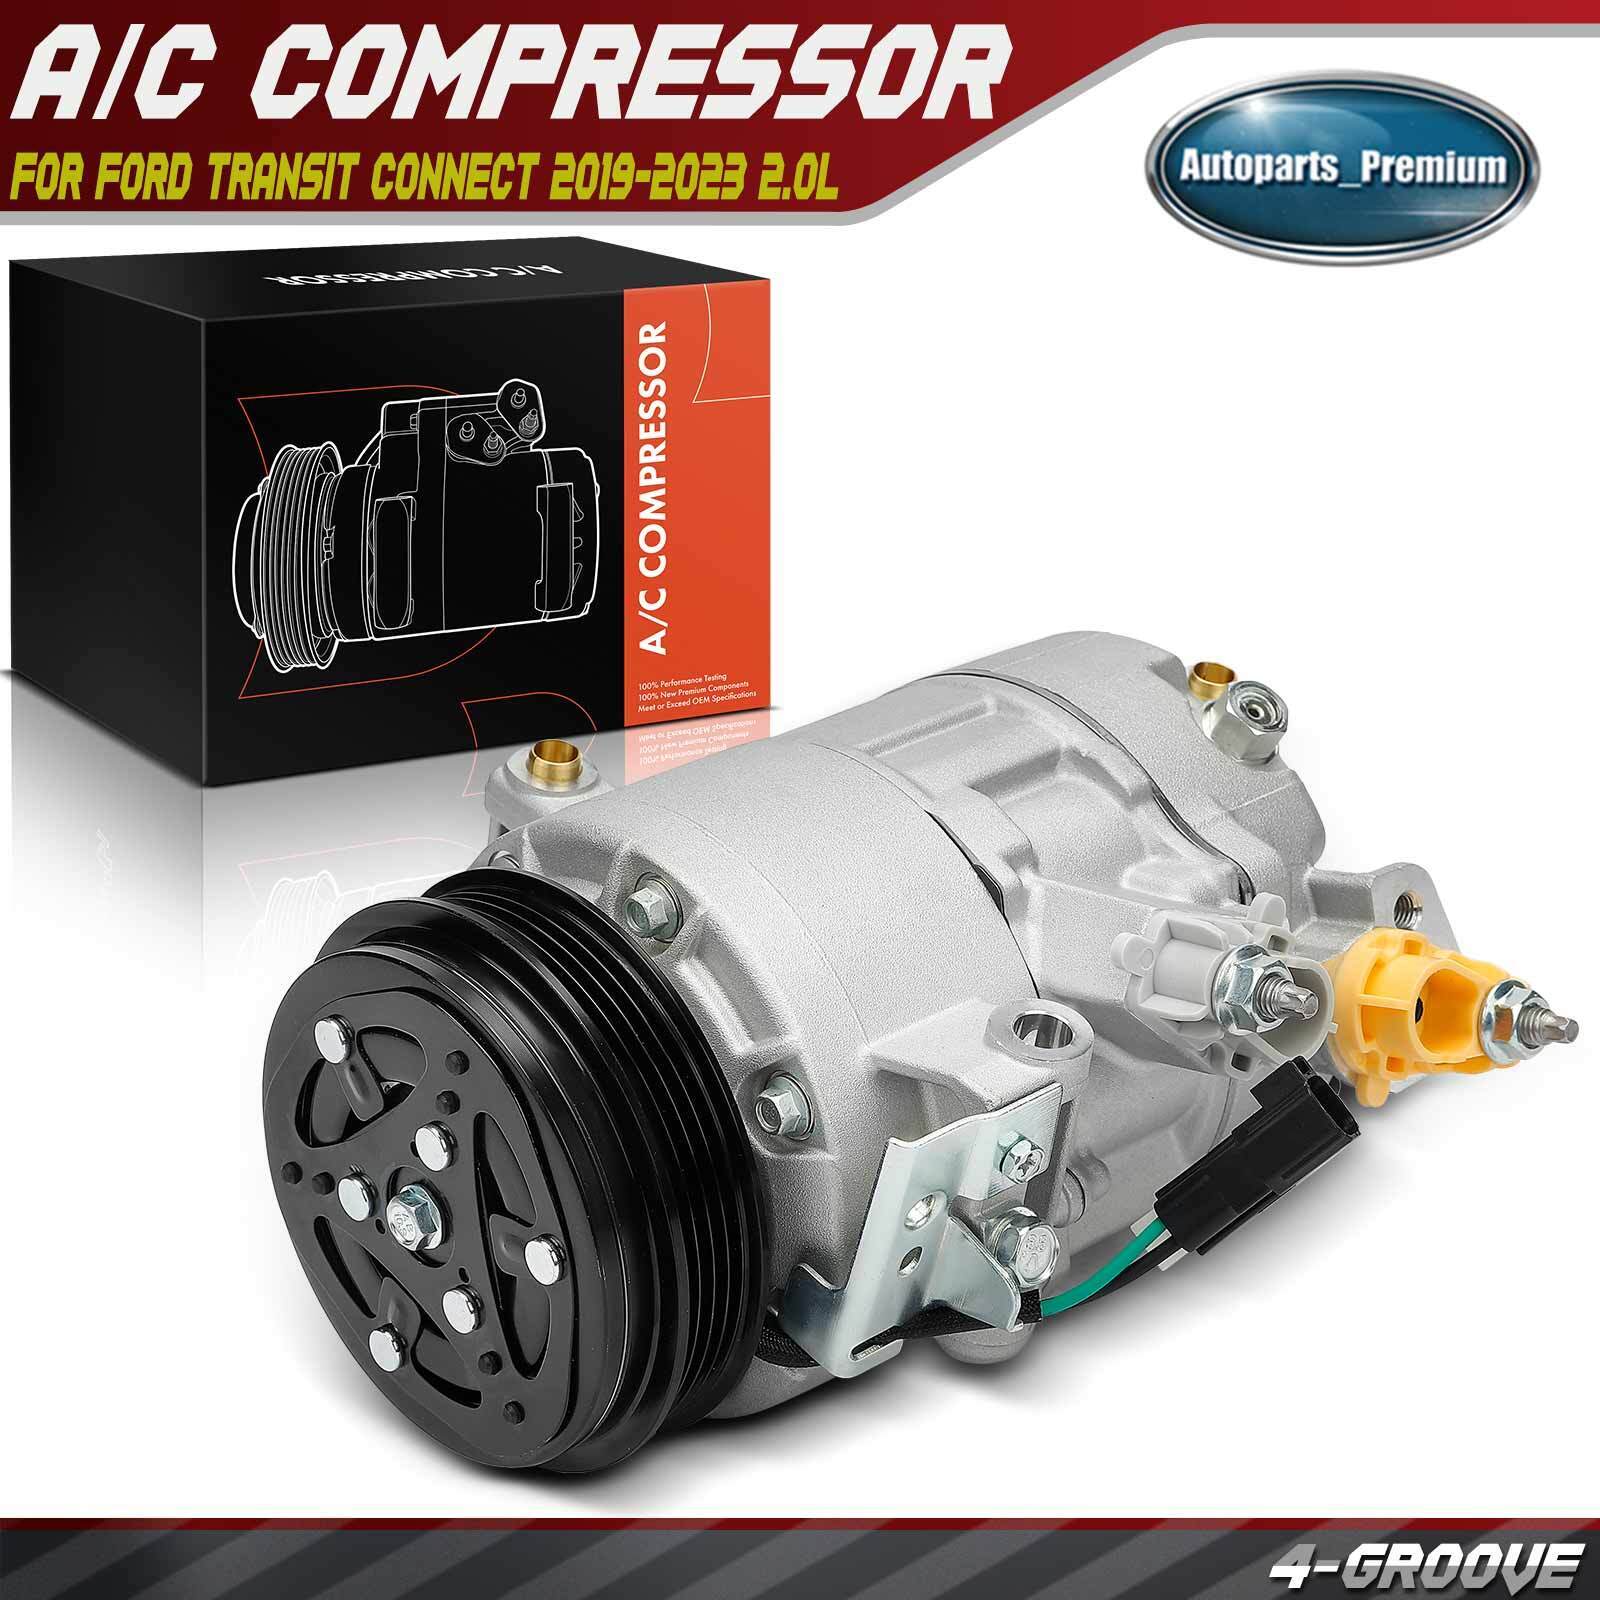 New A/C Compressor with Clutch for Ford Transit Connect 2019 2020-2023 L4 2.0L